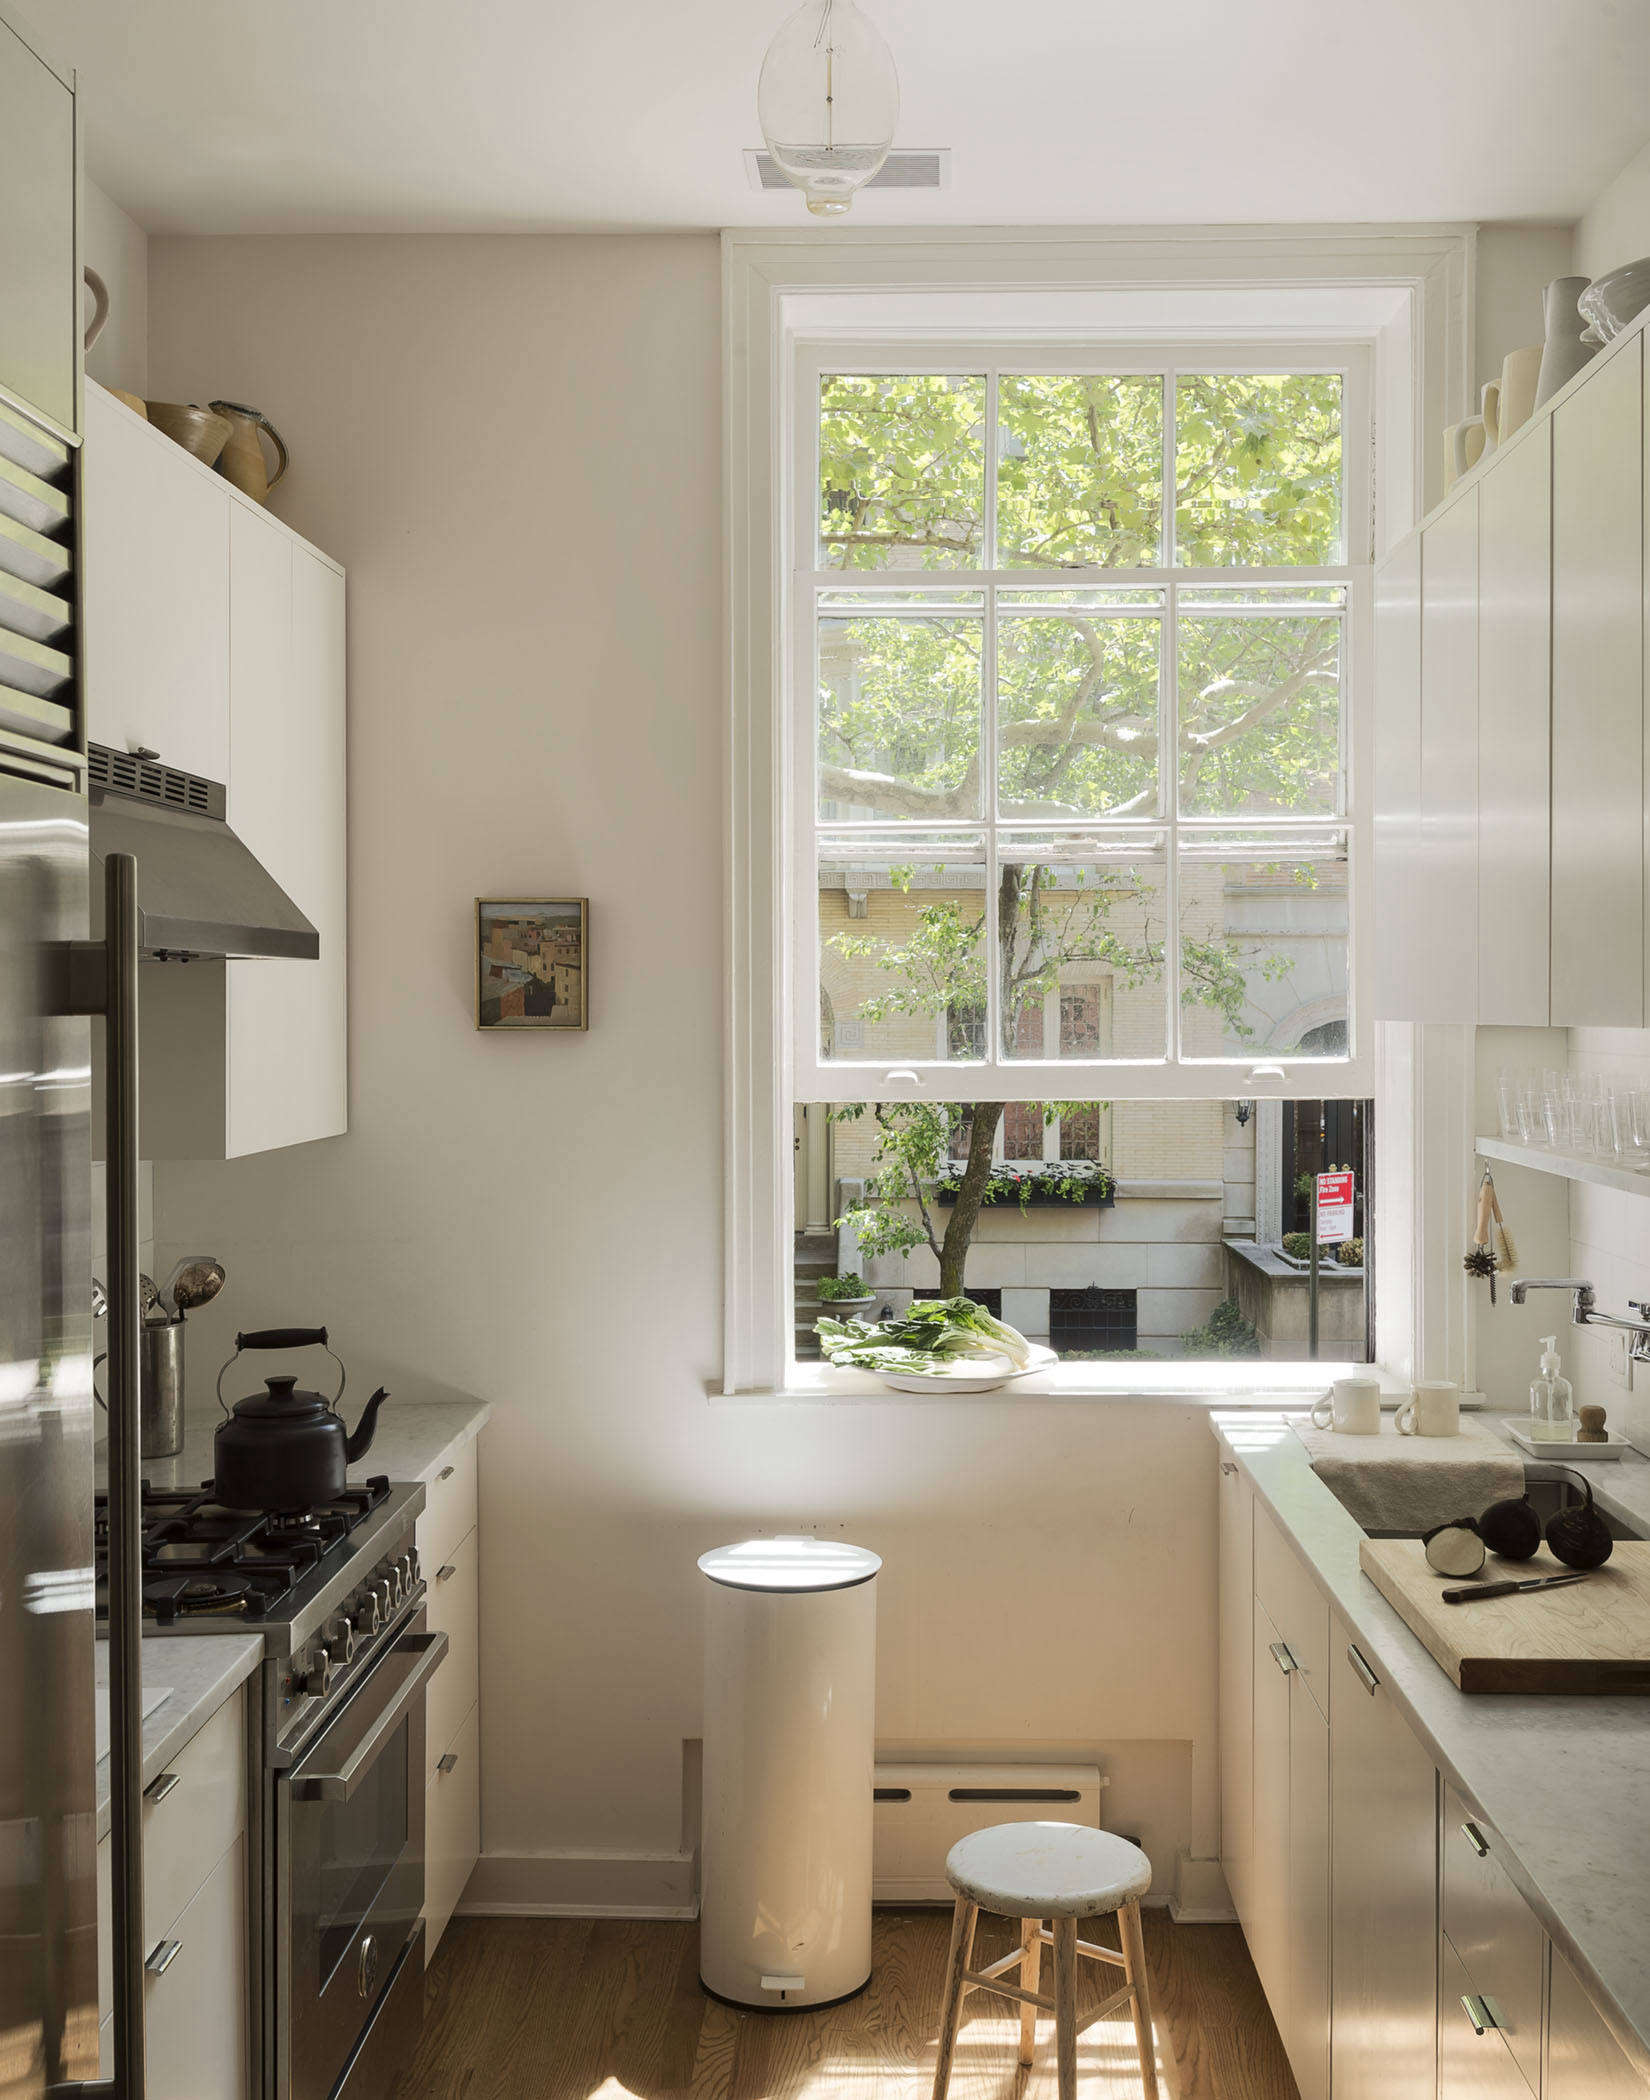 Steal This Look: A Remodelista's Minimalist Galley Kitchen in Brooklyn Heights